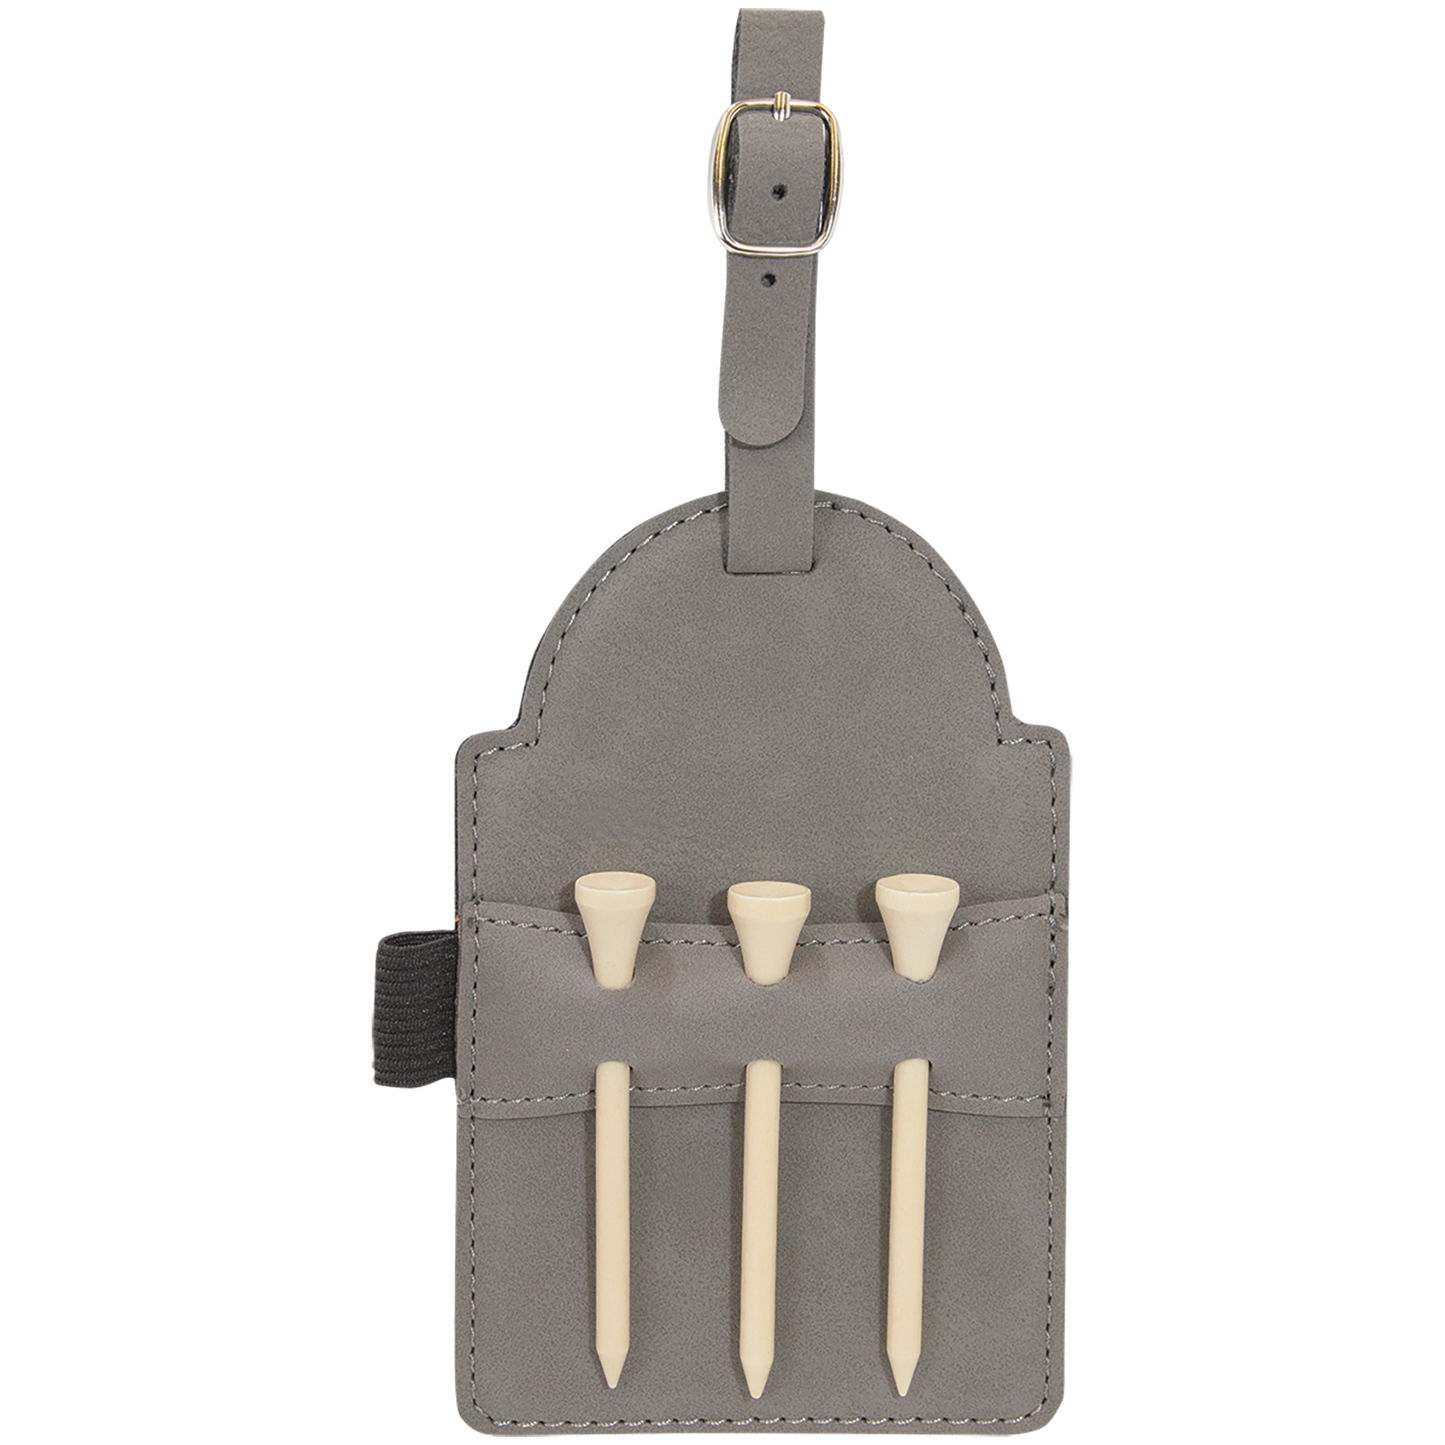 5" x 3 1/4" Gray Leatherette Golf Bag Tag with 3 Wooden Tees